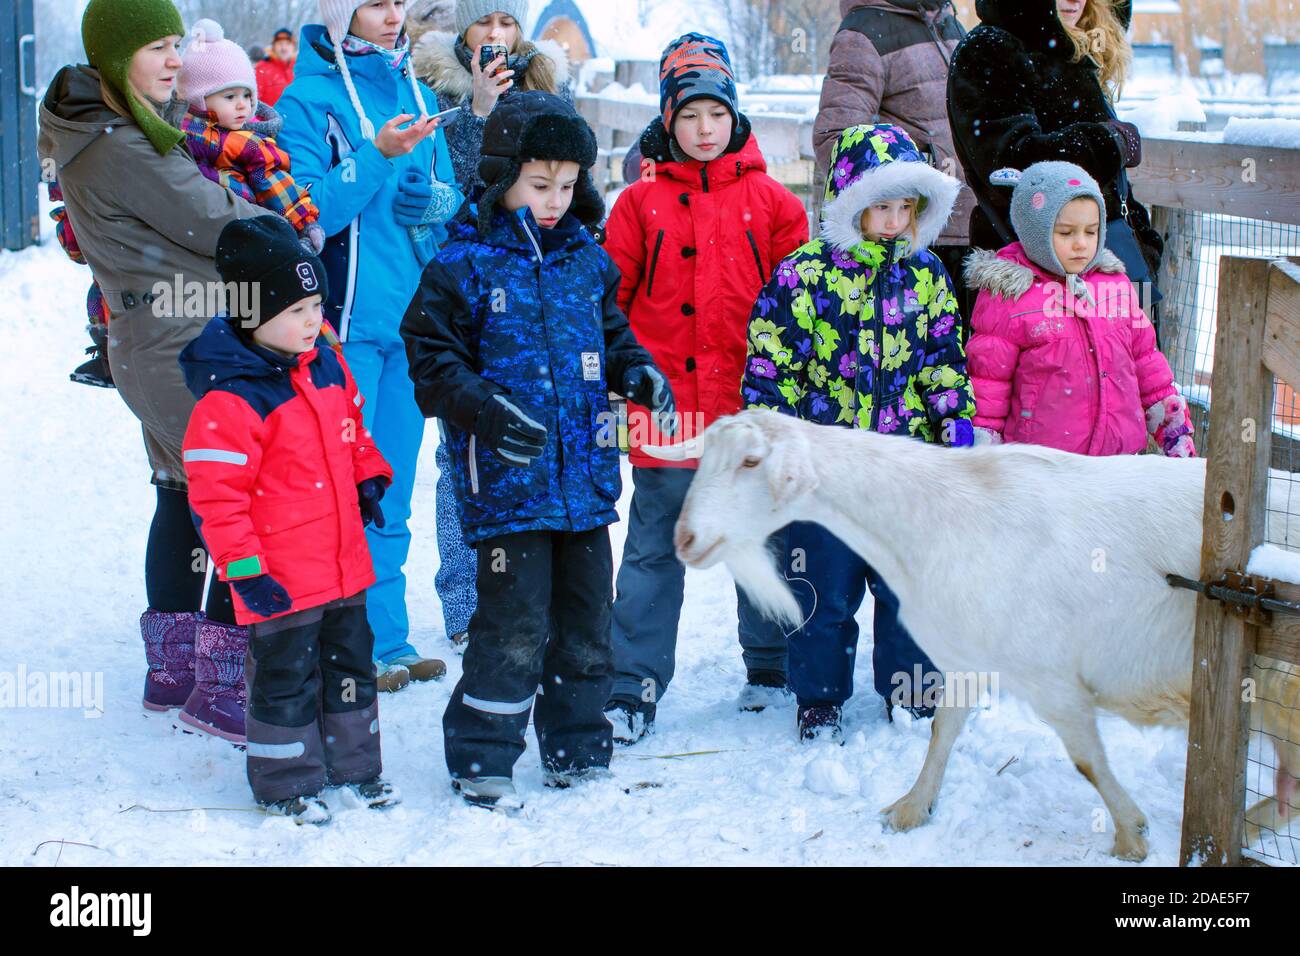 Moscow region / Russia - 01 04 2019: Children look at the running goat. A lot of people on the farm in winter. Livestock on the farm runs out to the c Stock Photo